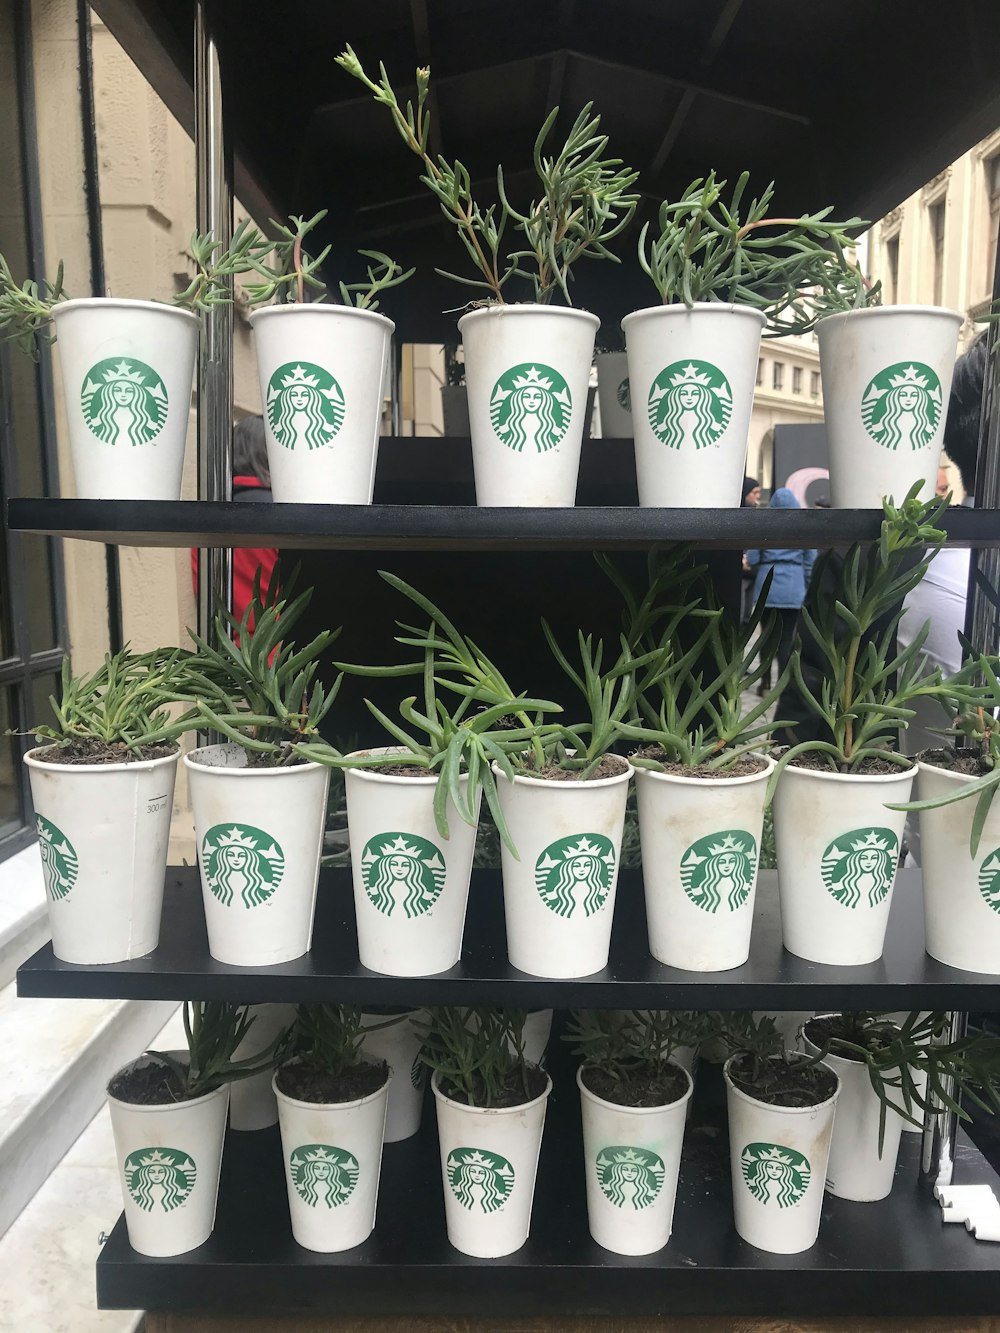 green plants planted on Starbucks cups